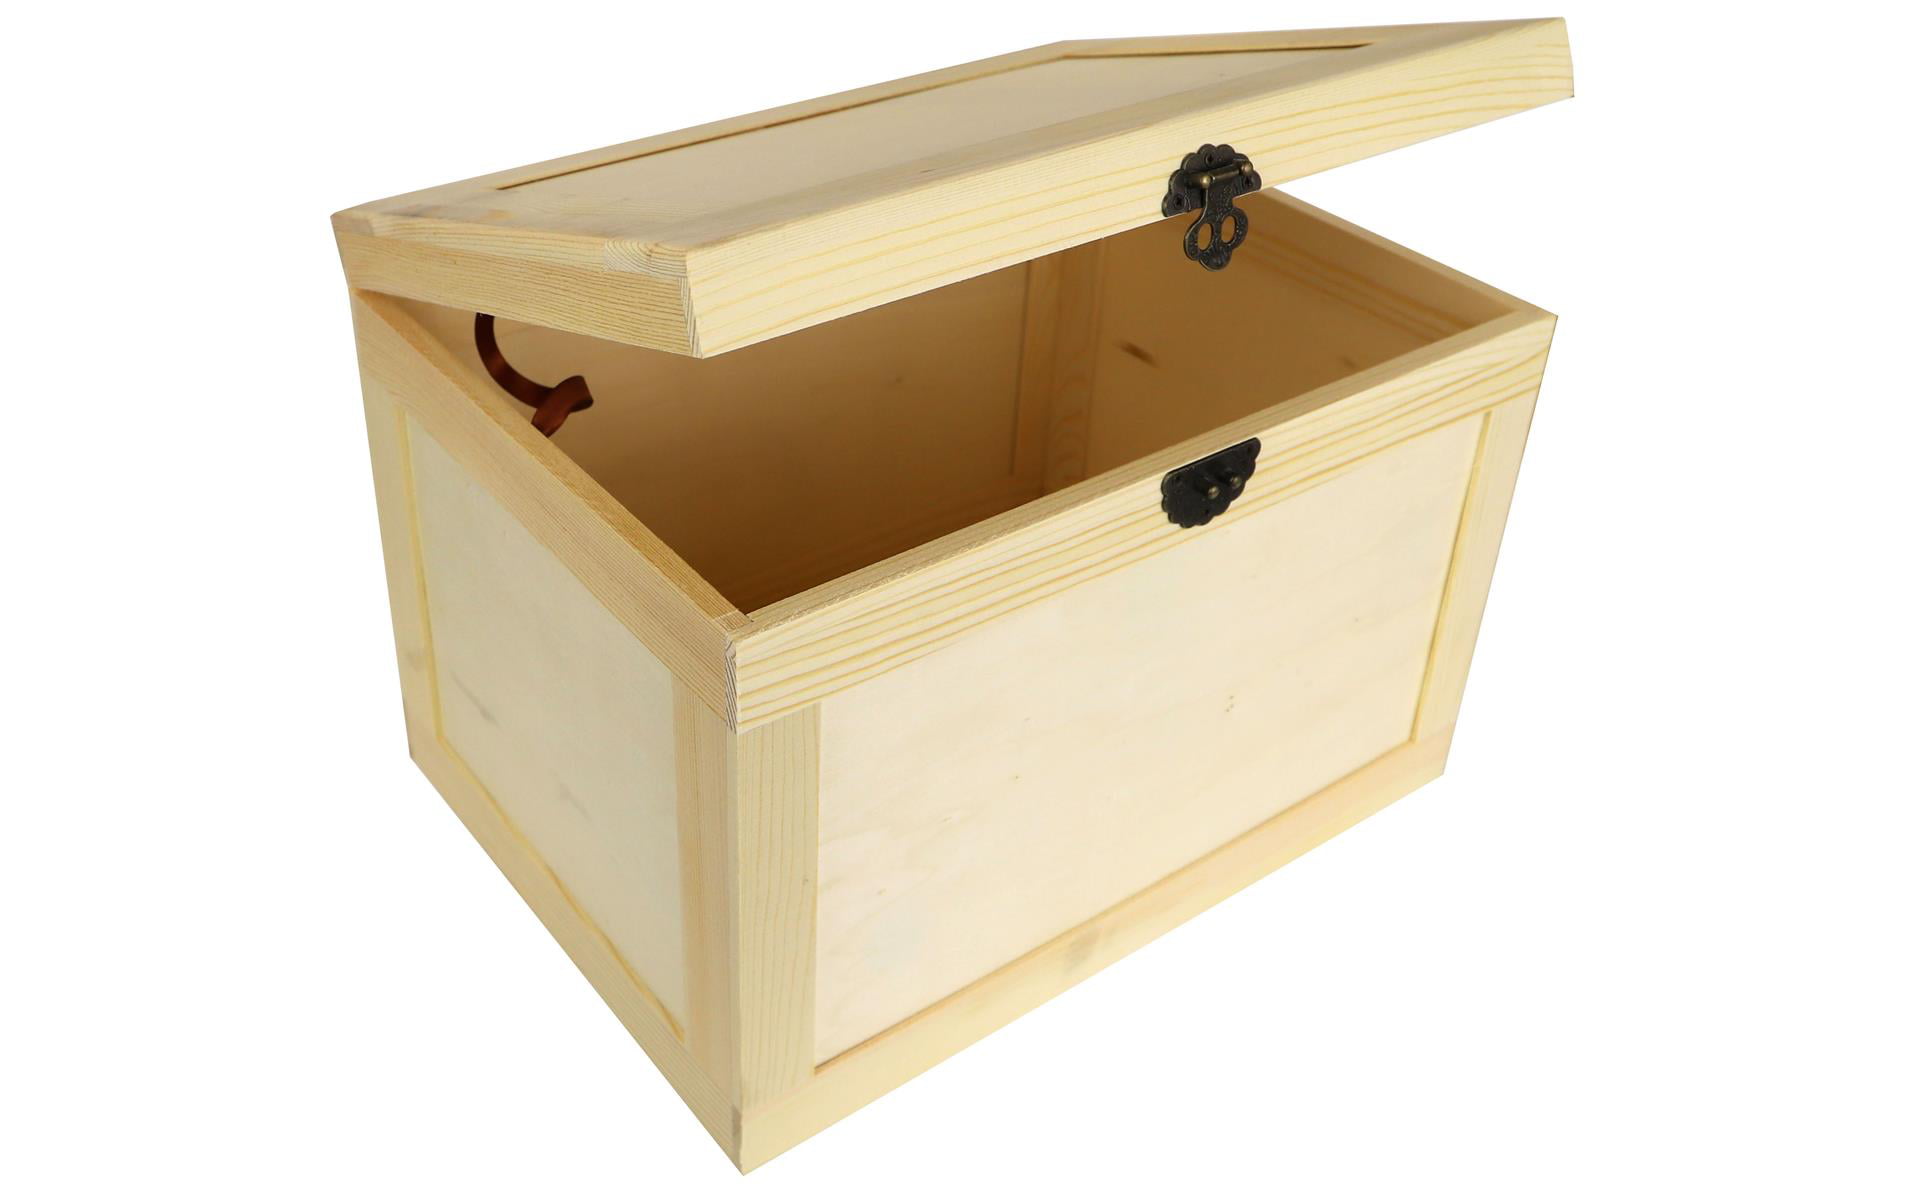 Sch 360 Spc Wood Box Trunk Unfinished, Unfinished Wood Storage Trunk